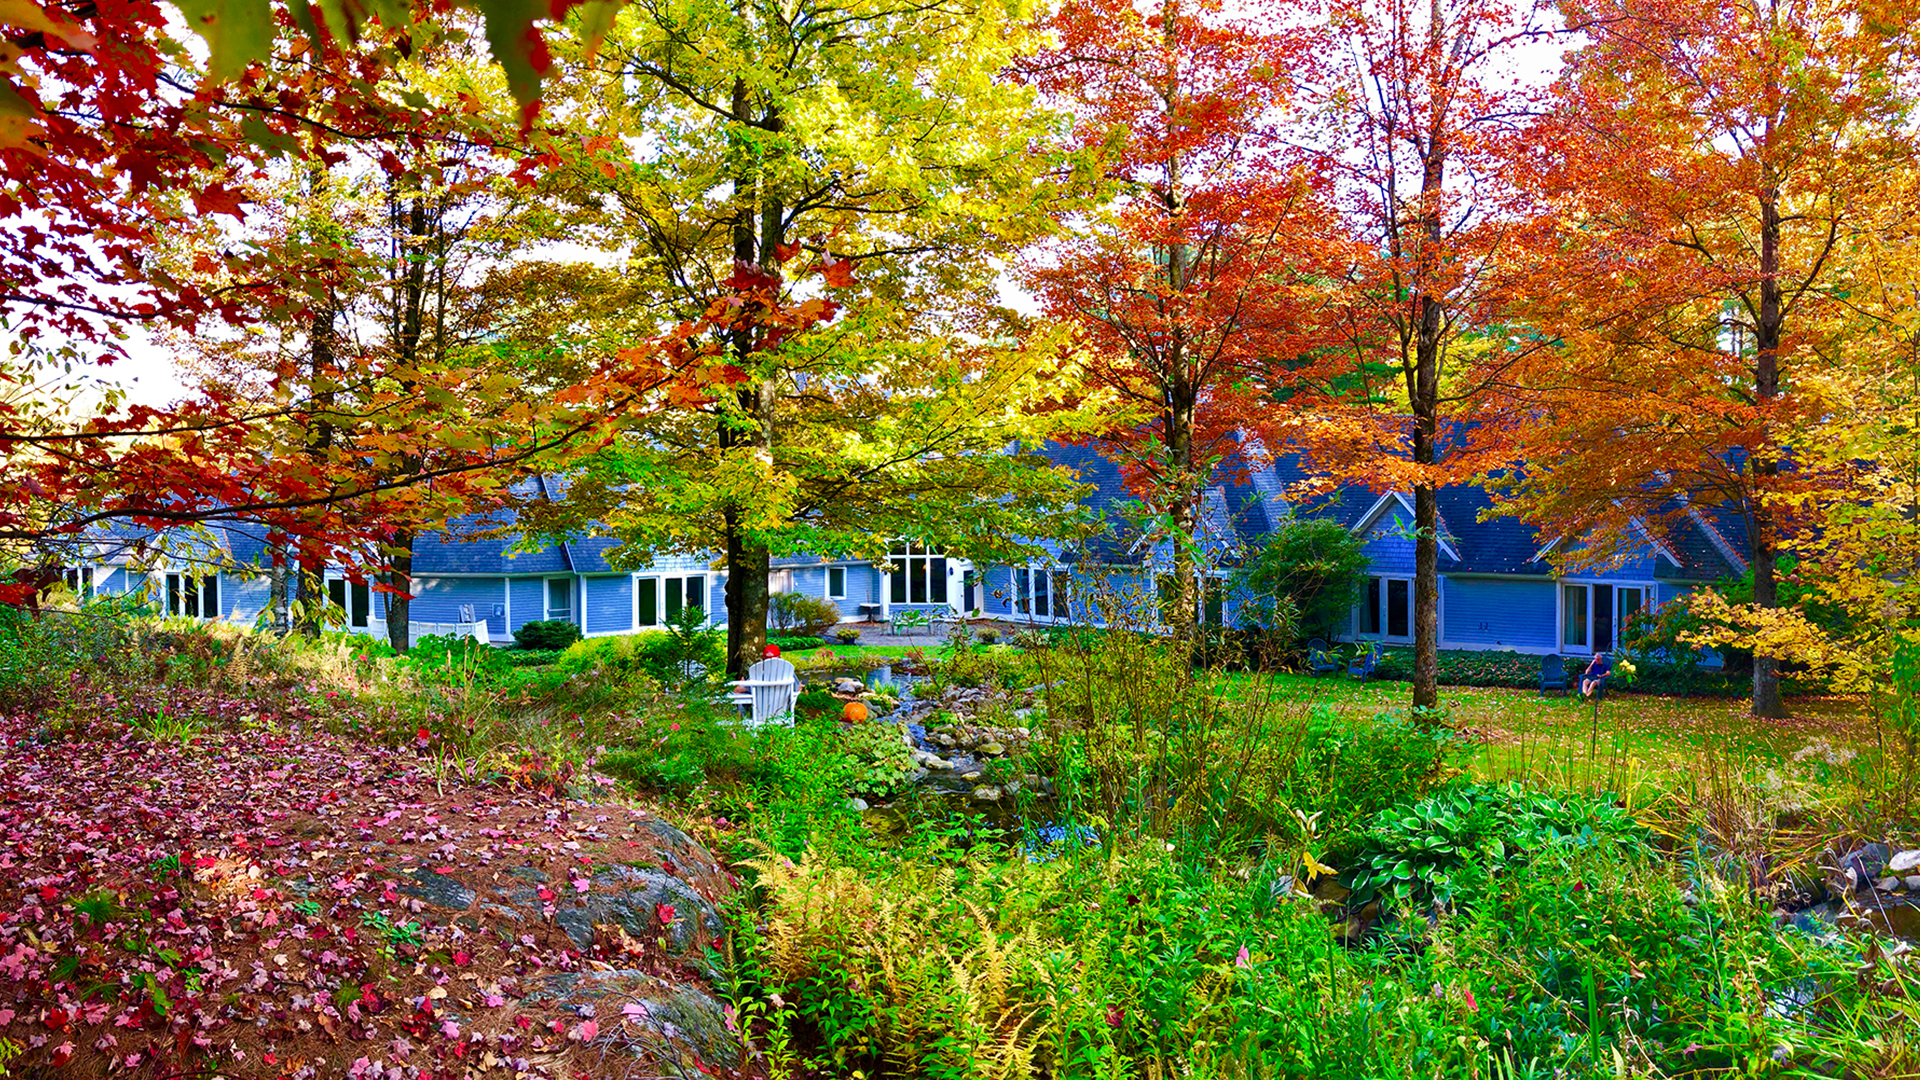 Stone Hill Inn - Bed and Breakfast - Backyard Garden for Weddings and Leisure